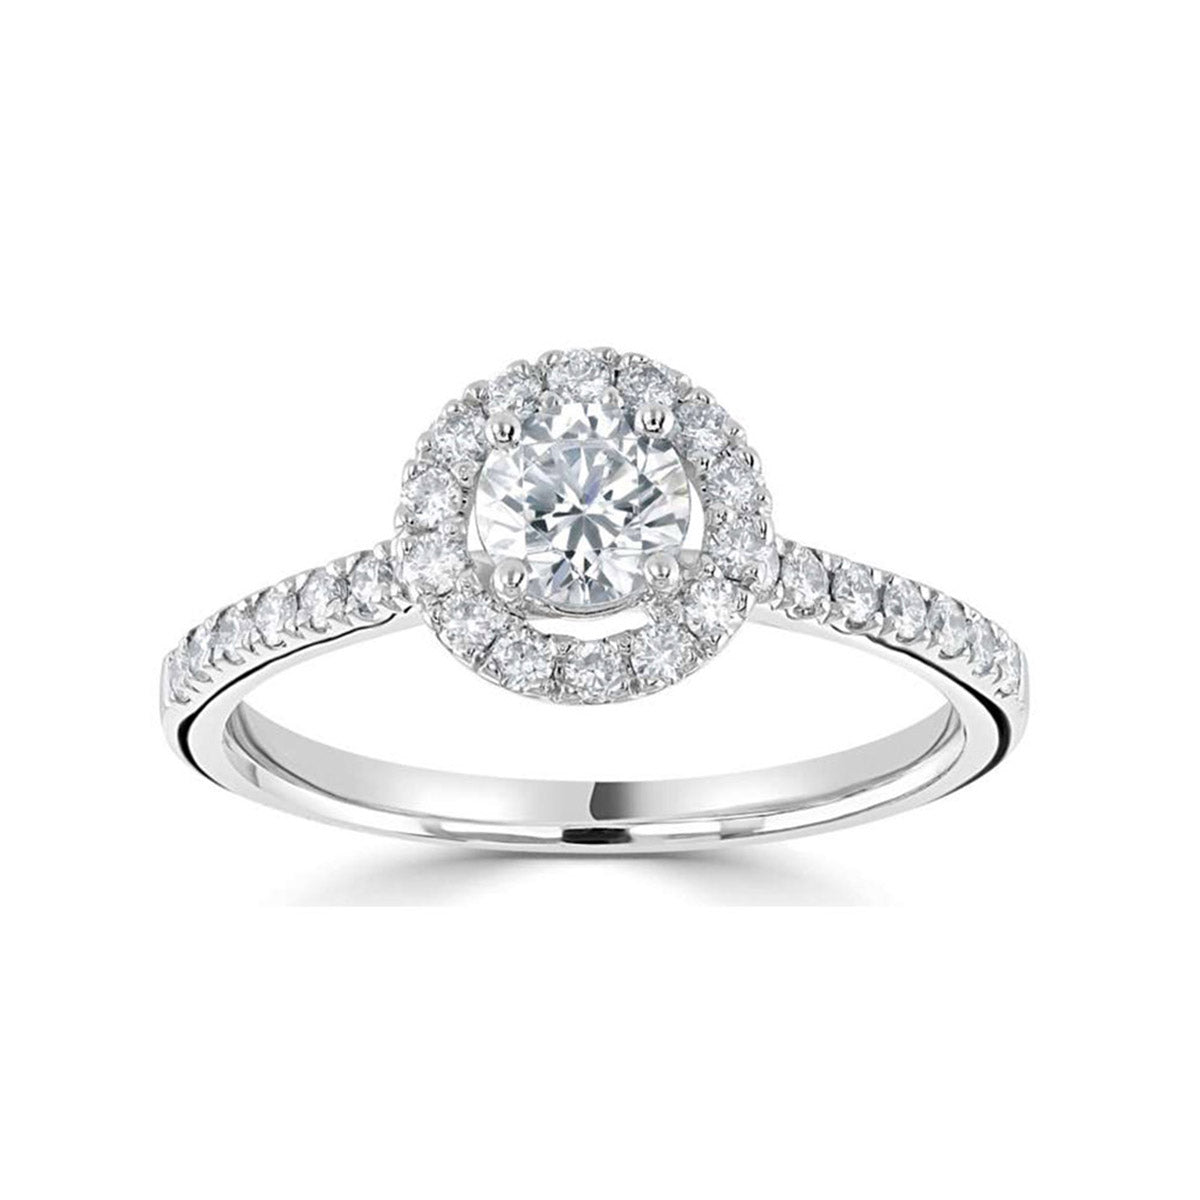 Brilliant round cut diamond set with 4 claws surrounded with a halo of diamonds with diamond set shoulders engagement ring